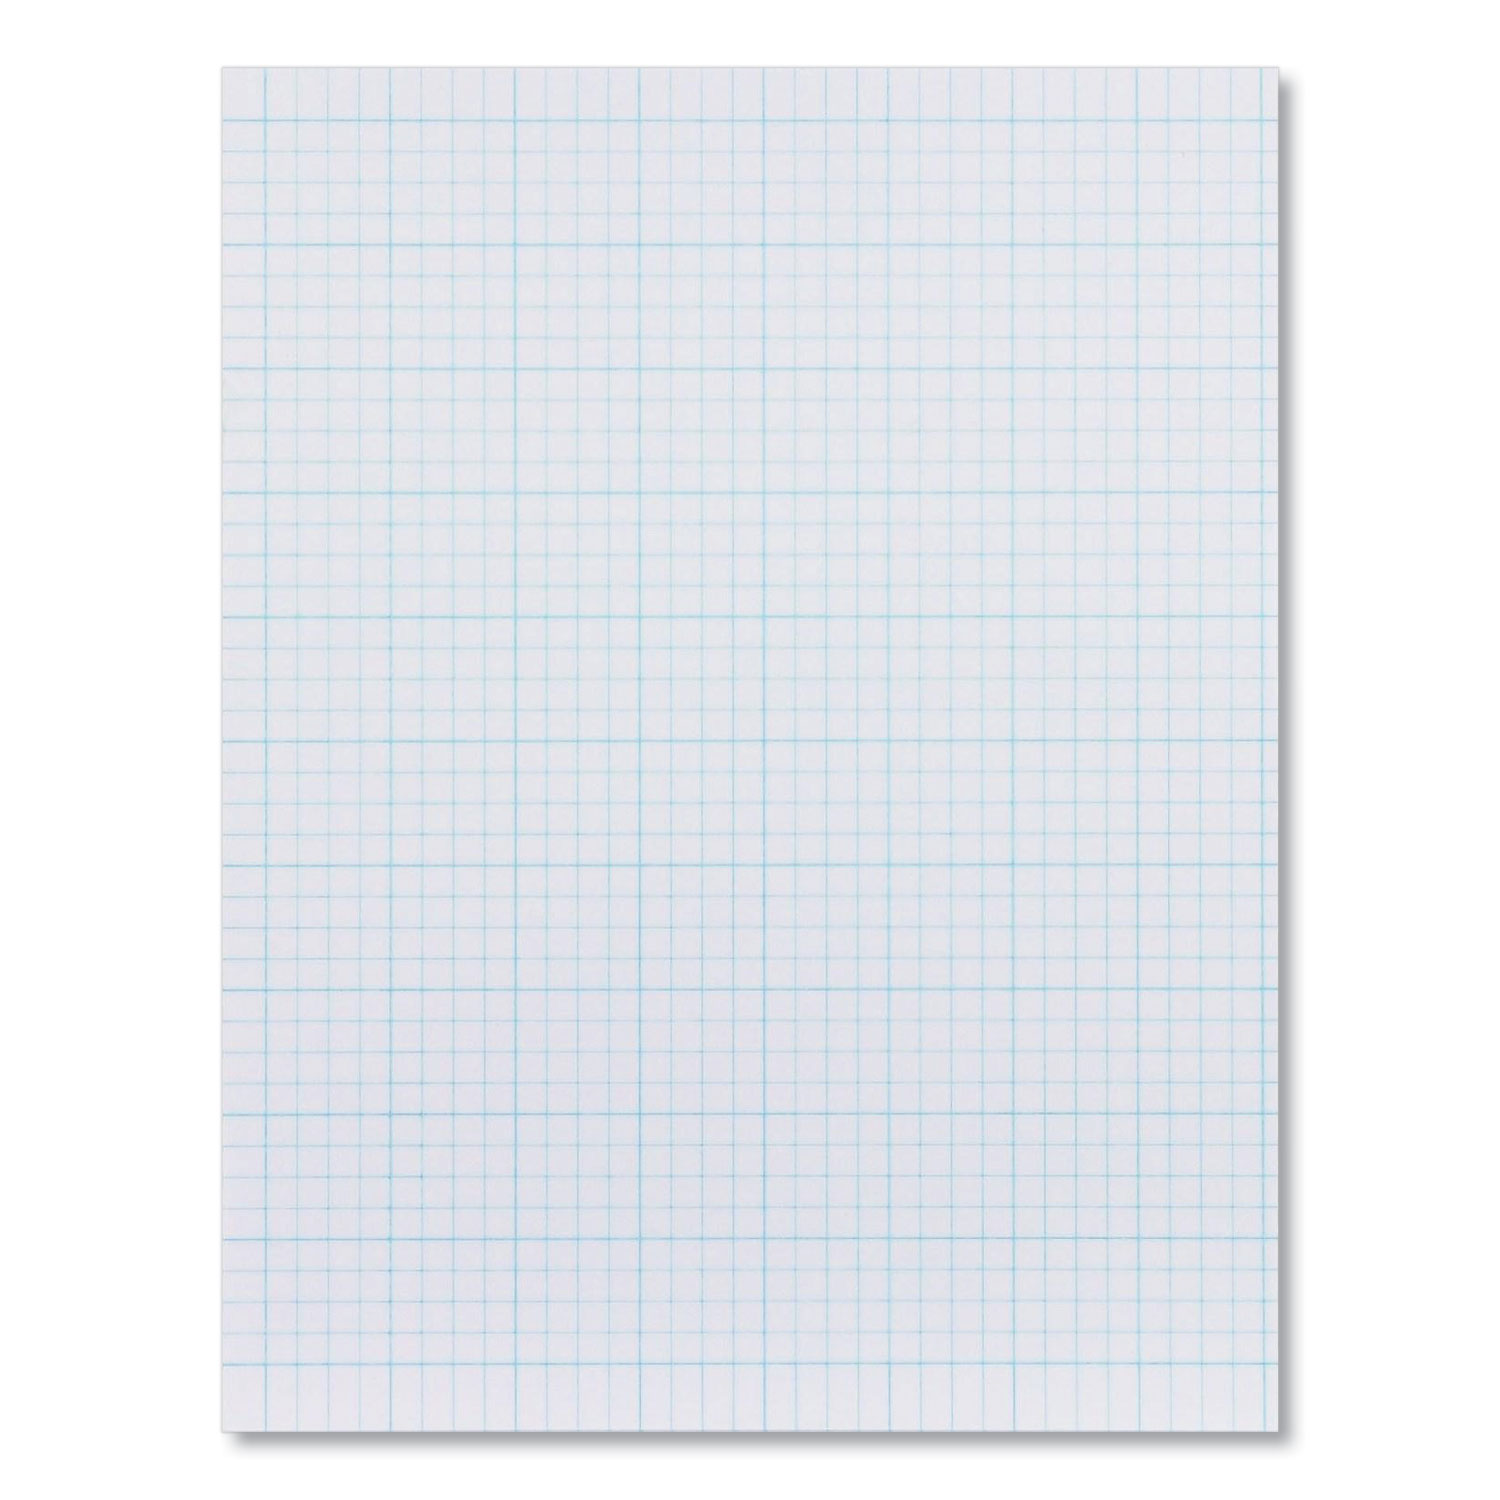 Ampad® Quadrille Pads, 10 sq/in Quadrille Rule, 8.5 x 11, White, 40 Sheets